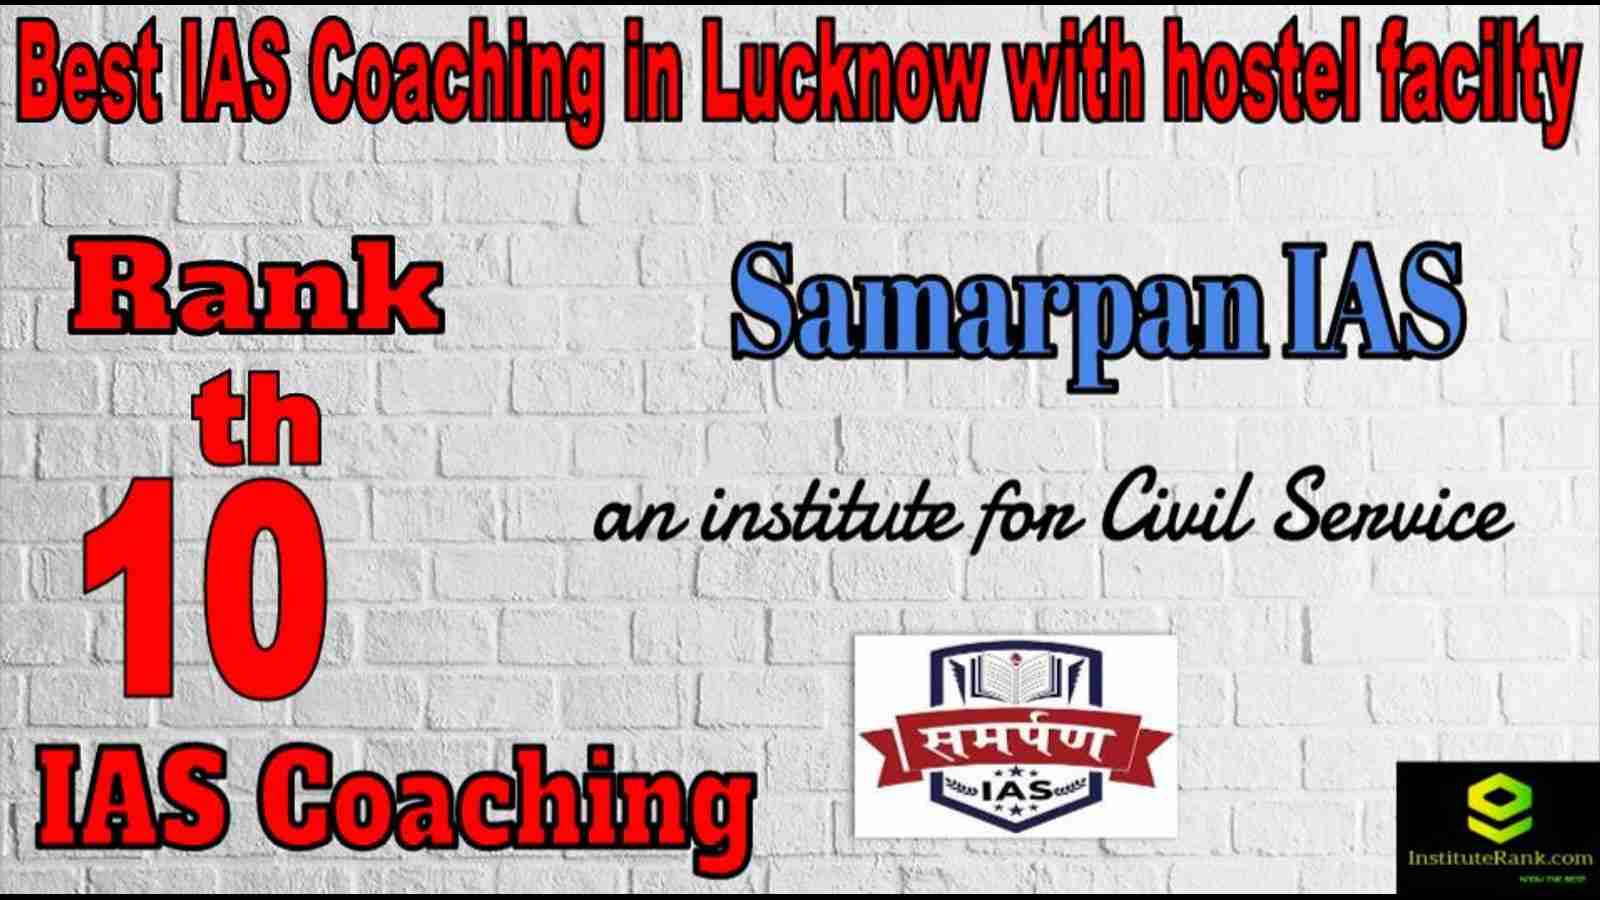 10th Best IAS Coaching in Kanpur with hostel facility 